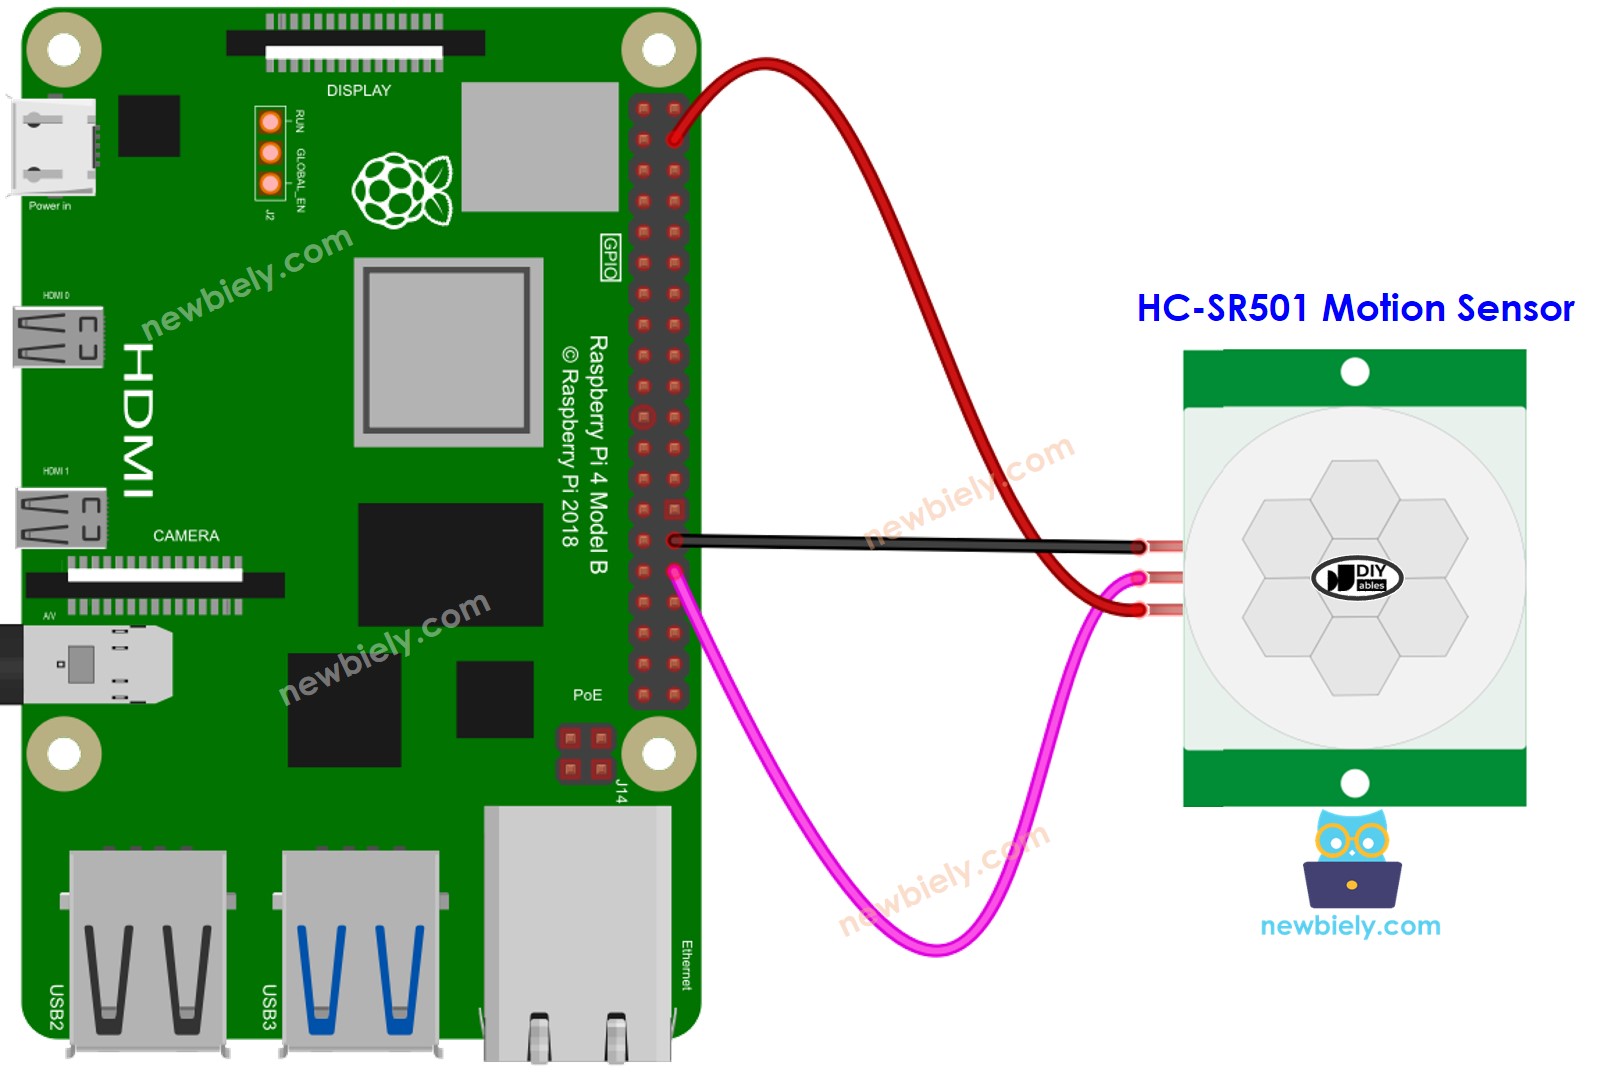 The wiring diagram between Raspberry Pi and Motion Sensor